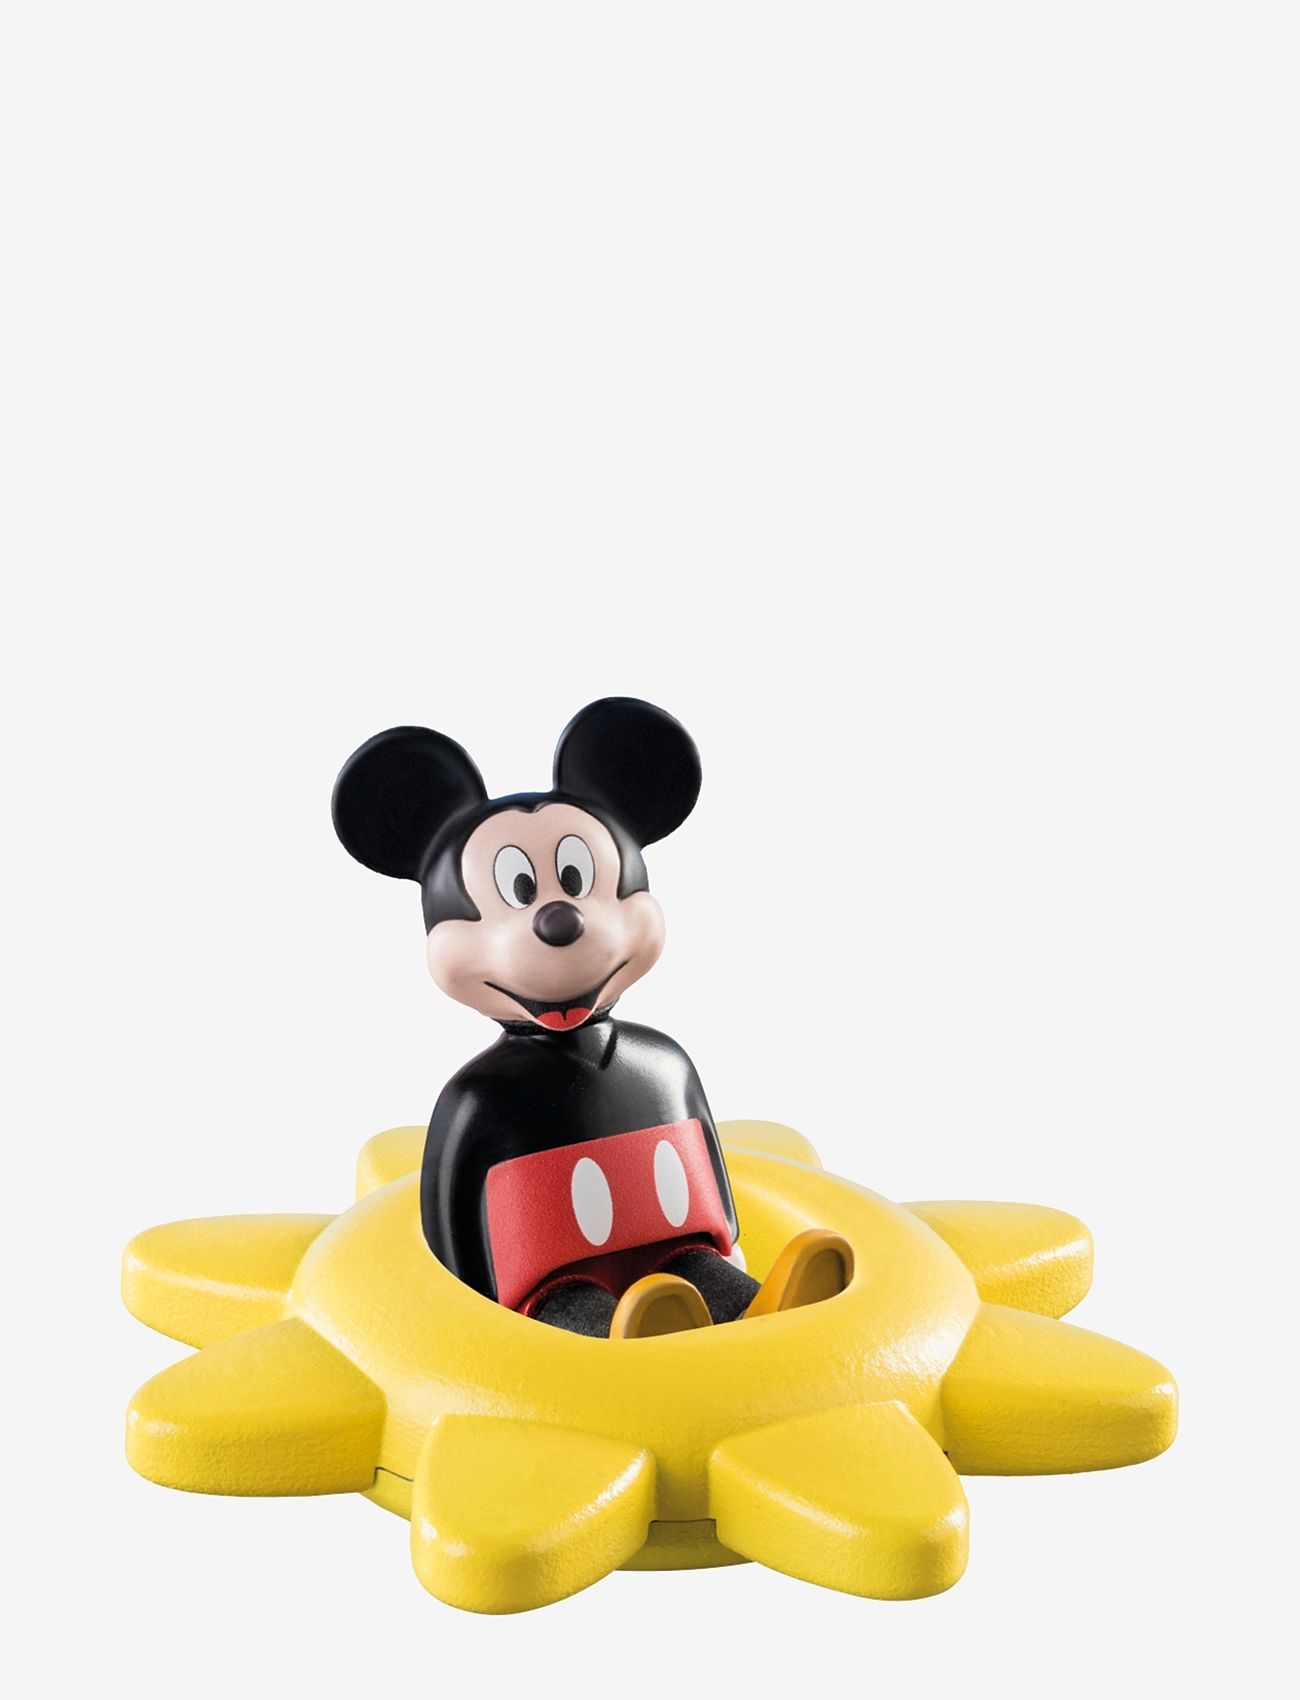 PLAYMOBIL - PLAYMOBIL 1.2.3 & Disney: Mickey's Spinning Sun with Rattle Feature - 71321 - playmobil 1.2.3 - multicolored - 1